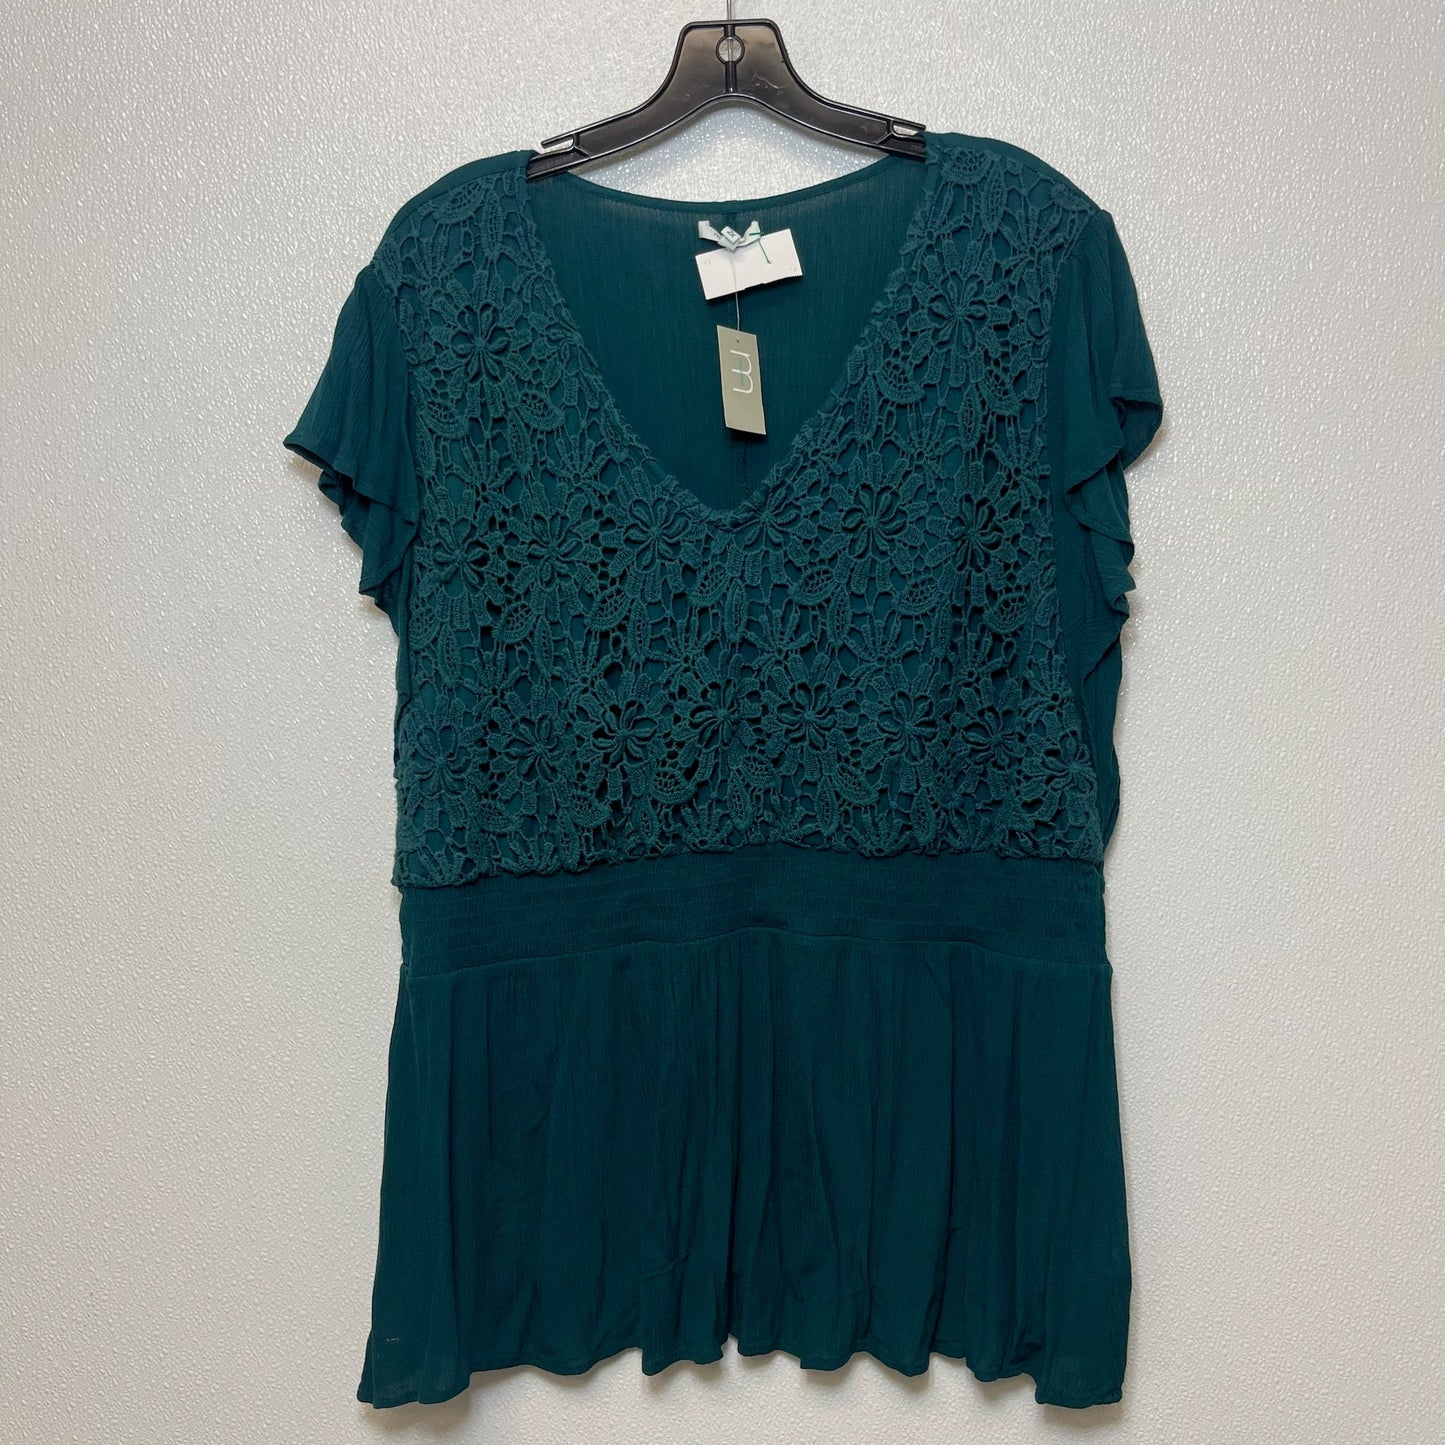 Green Top Short Sleeve Maurices O, Size 2